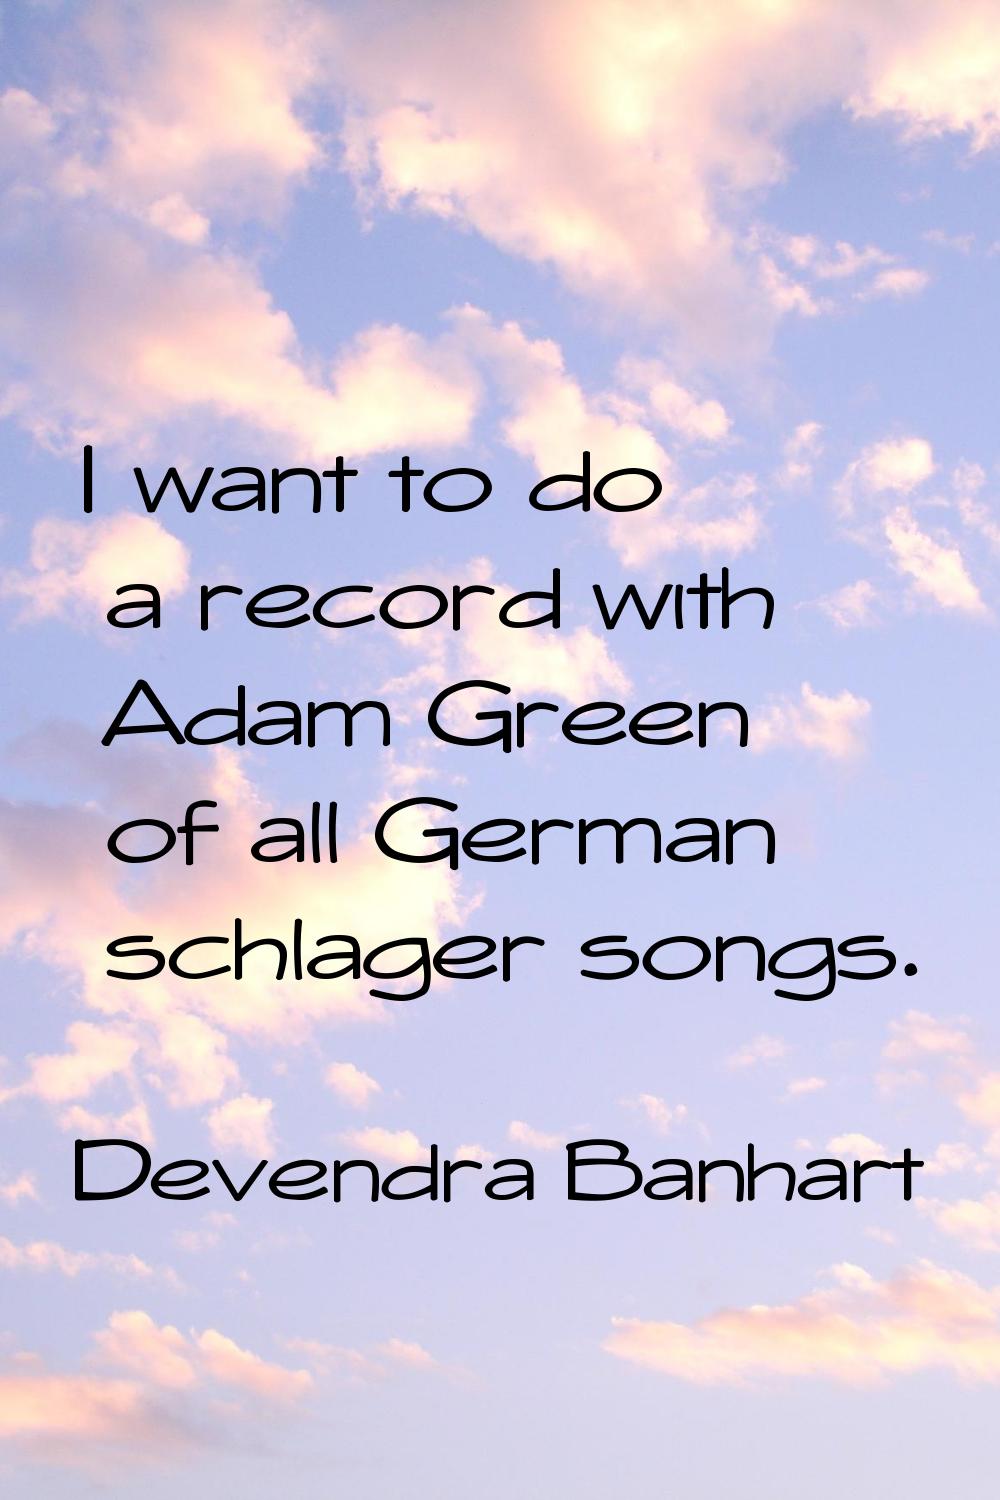 I want to do a record with Adam Green of all German schlager songs.